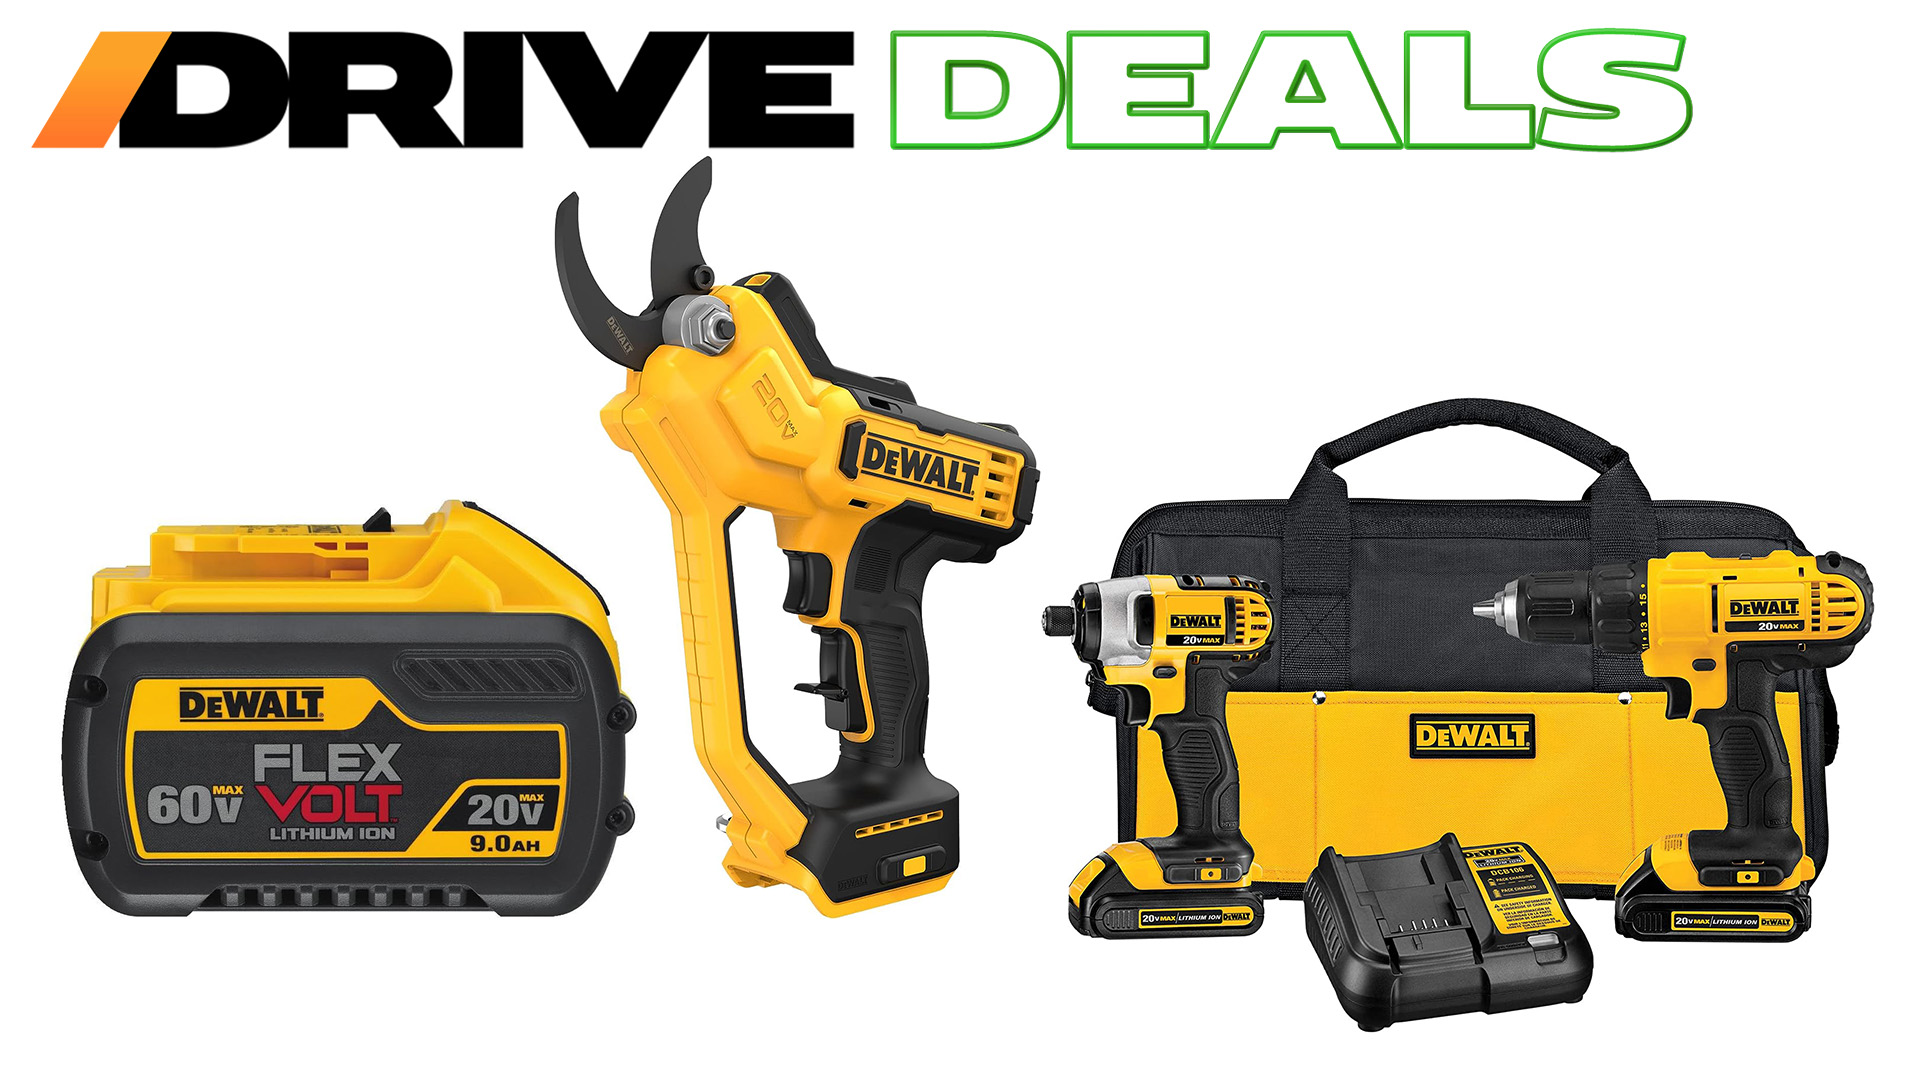 Artifact Alert rim DeWalt's Power Tools Are Back on Sale and Discounted Heavily